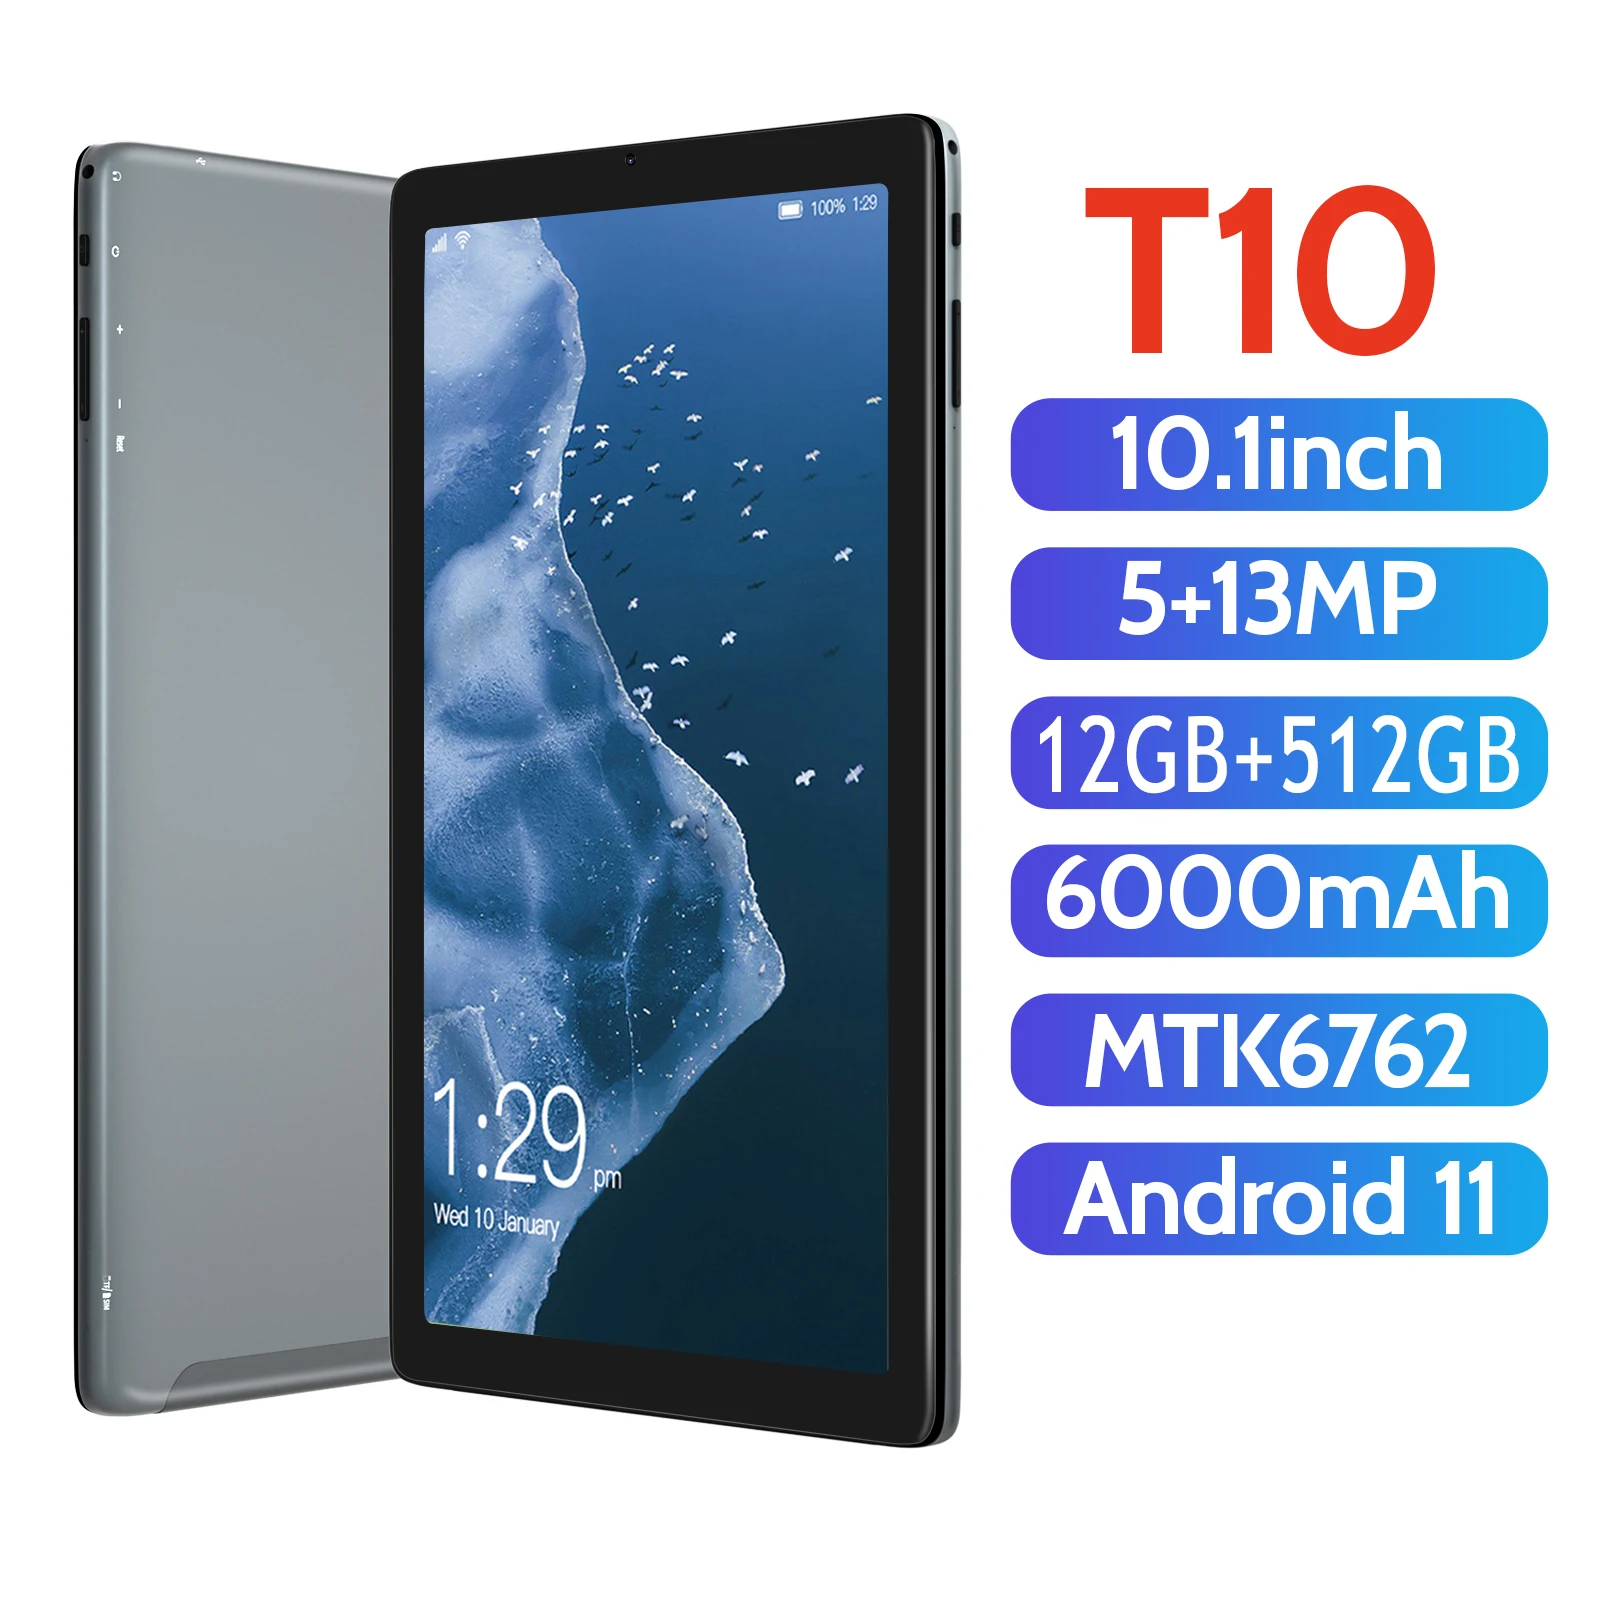 5G PC T10 Hot Sales Tablet Double SIM Large Screen 10.1I nch Android 11 4G Google Play 6000mAh MTK6762 Wifi 512GB ROM Race Pad